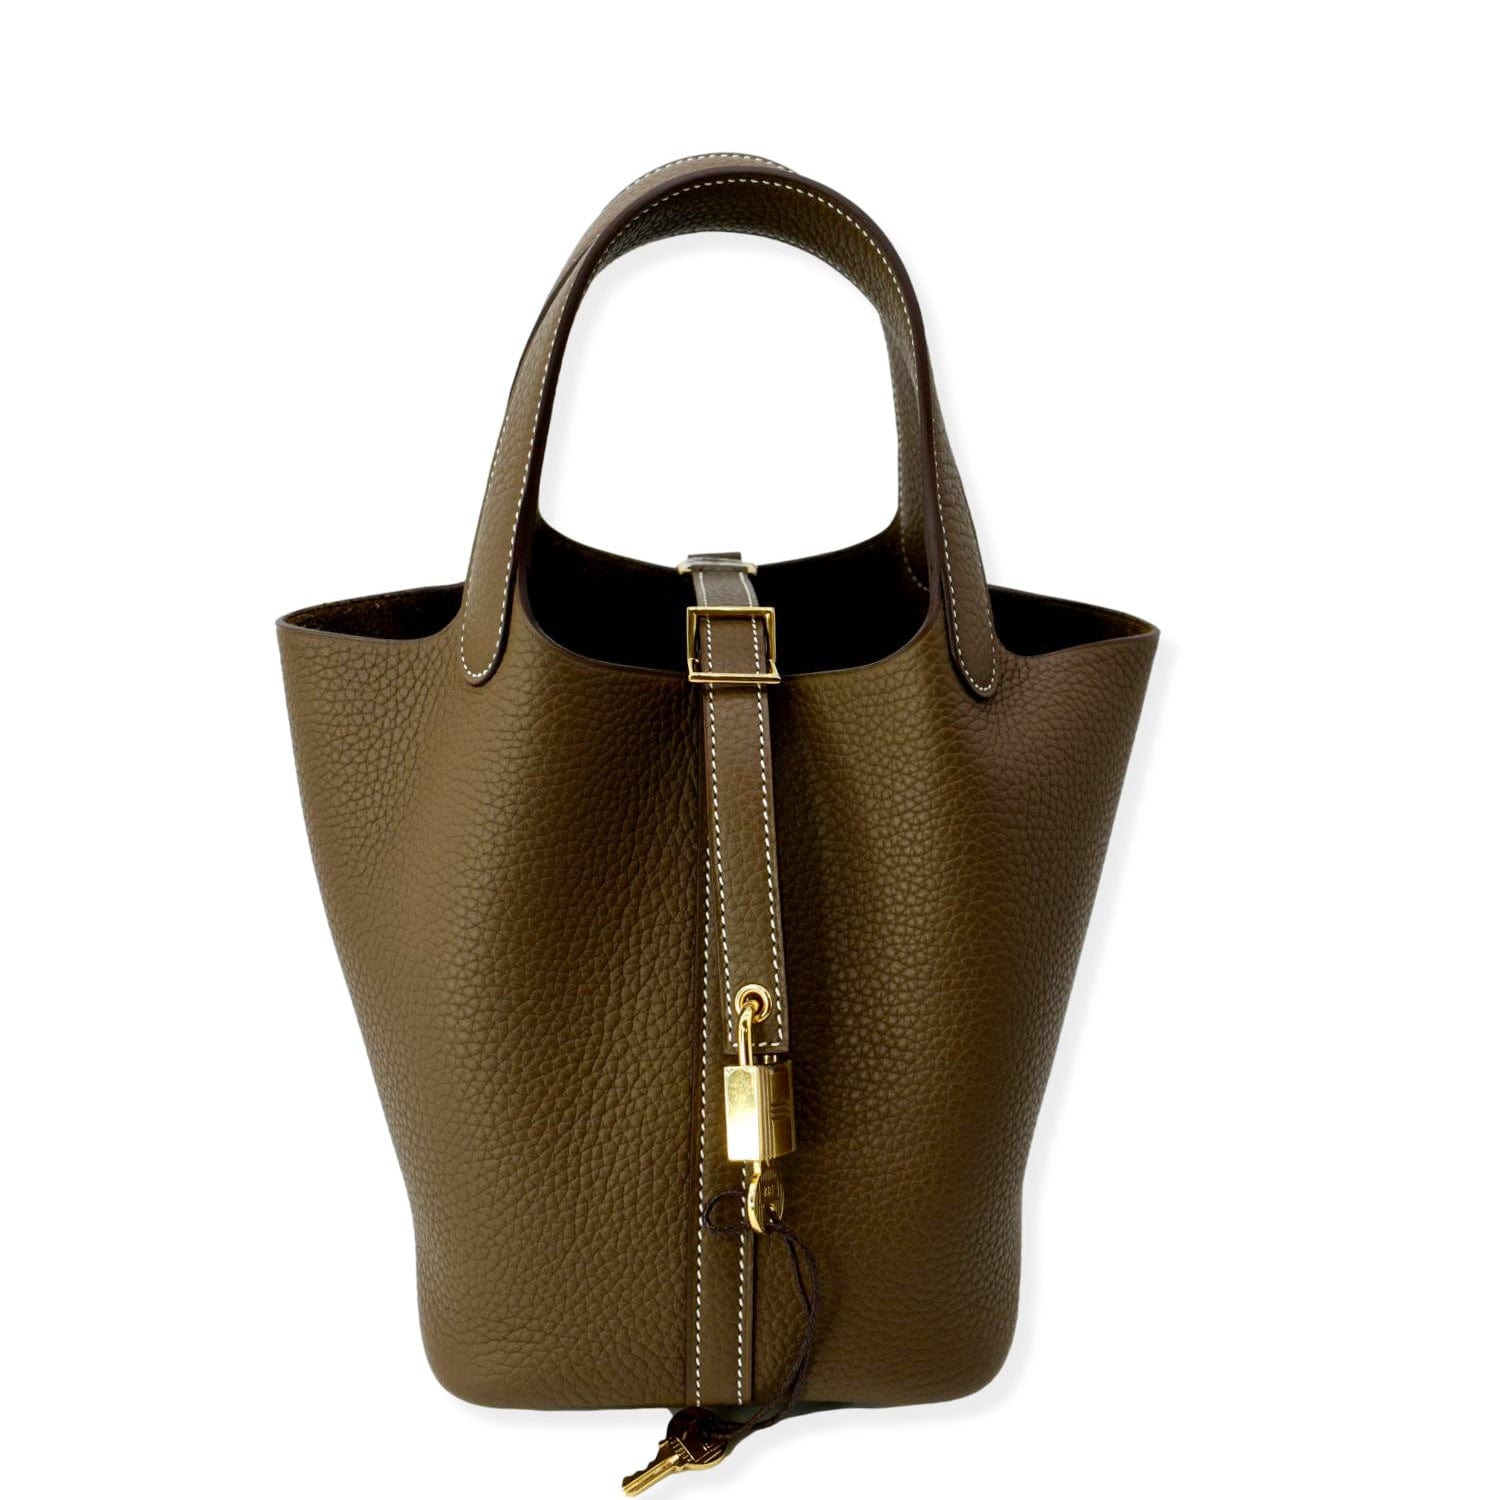 HERMES Picotin Lock 18 Taurillon Clemence Leather Tote Bag Taupe, MavieenmieuxShops